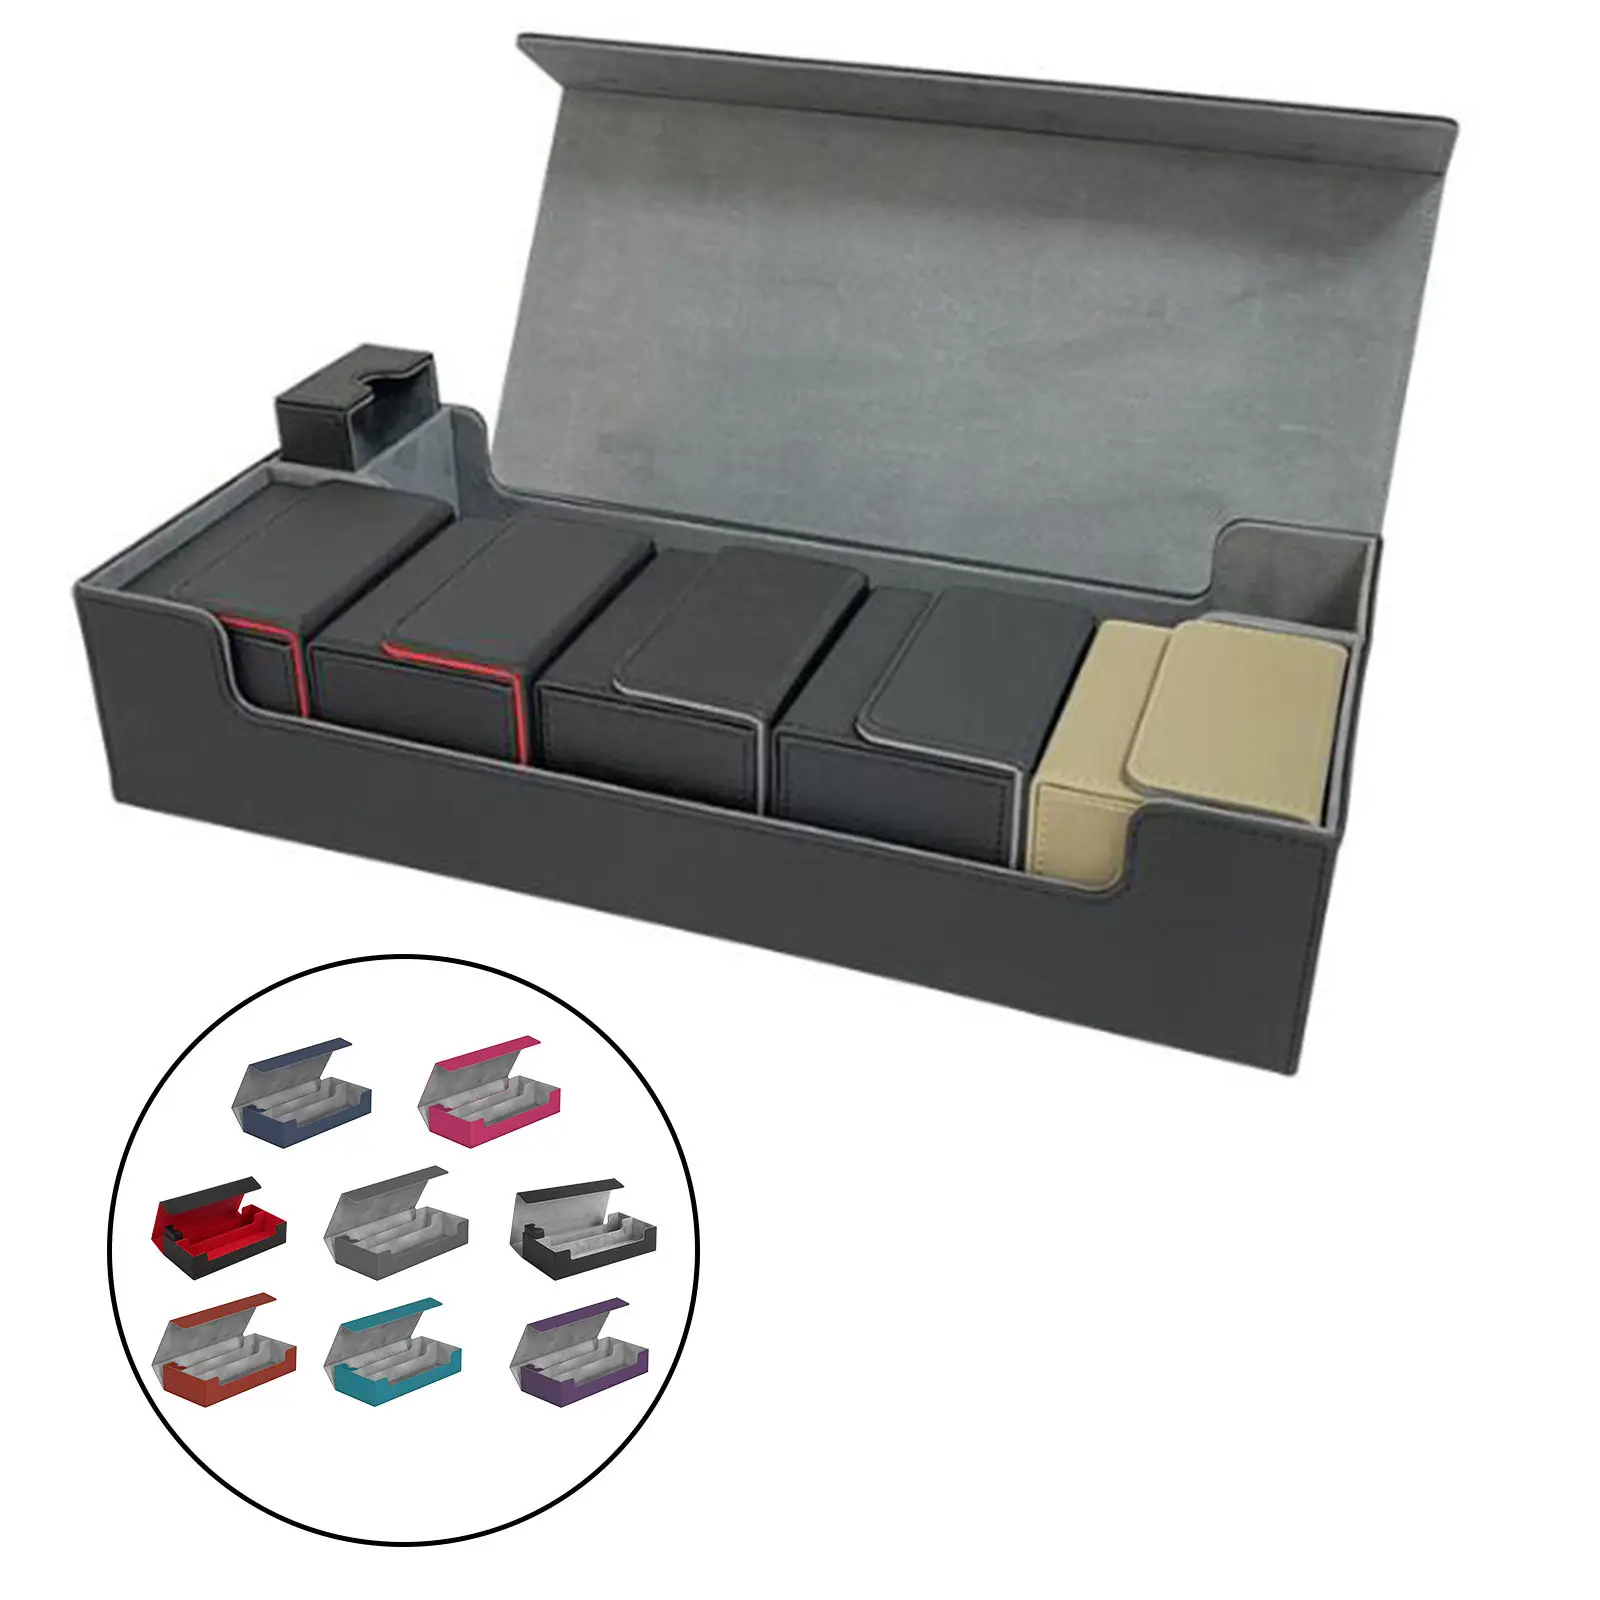 Card Deck Box Durable and Sturdy TCG, OCG Card Storage for Commander and MTG Card Carrying Case